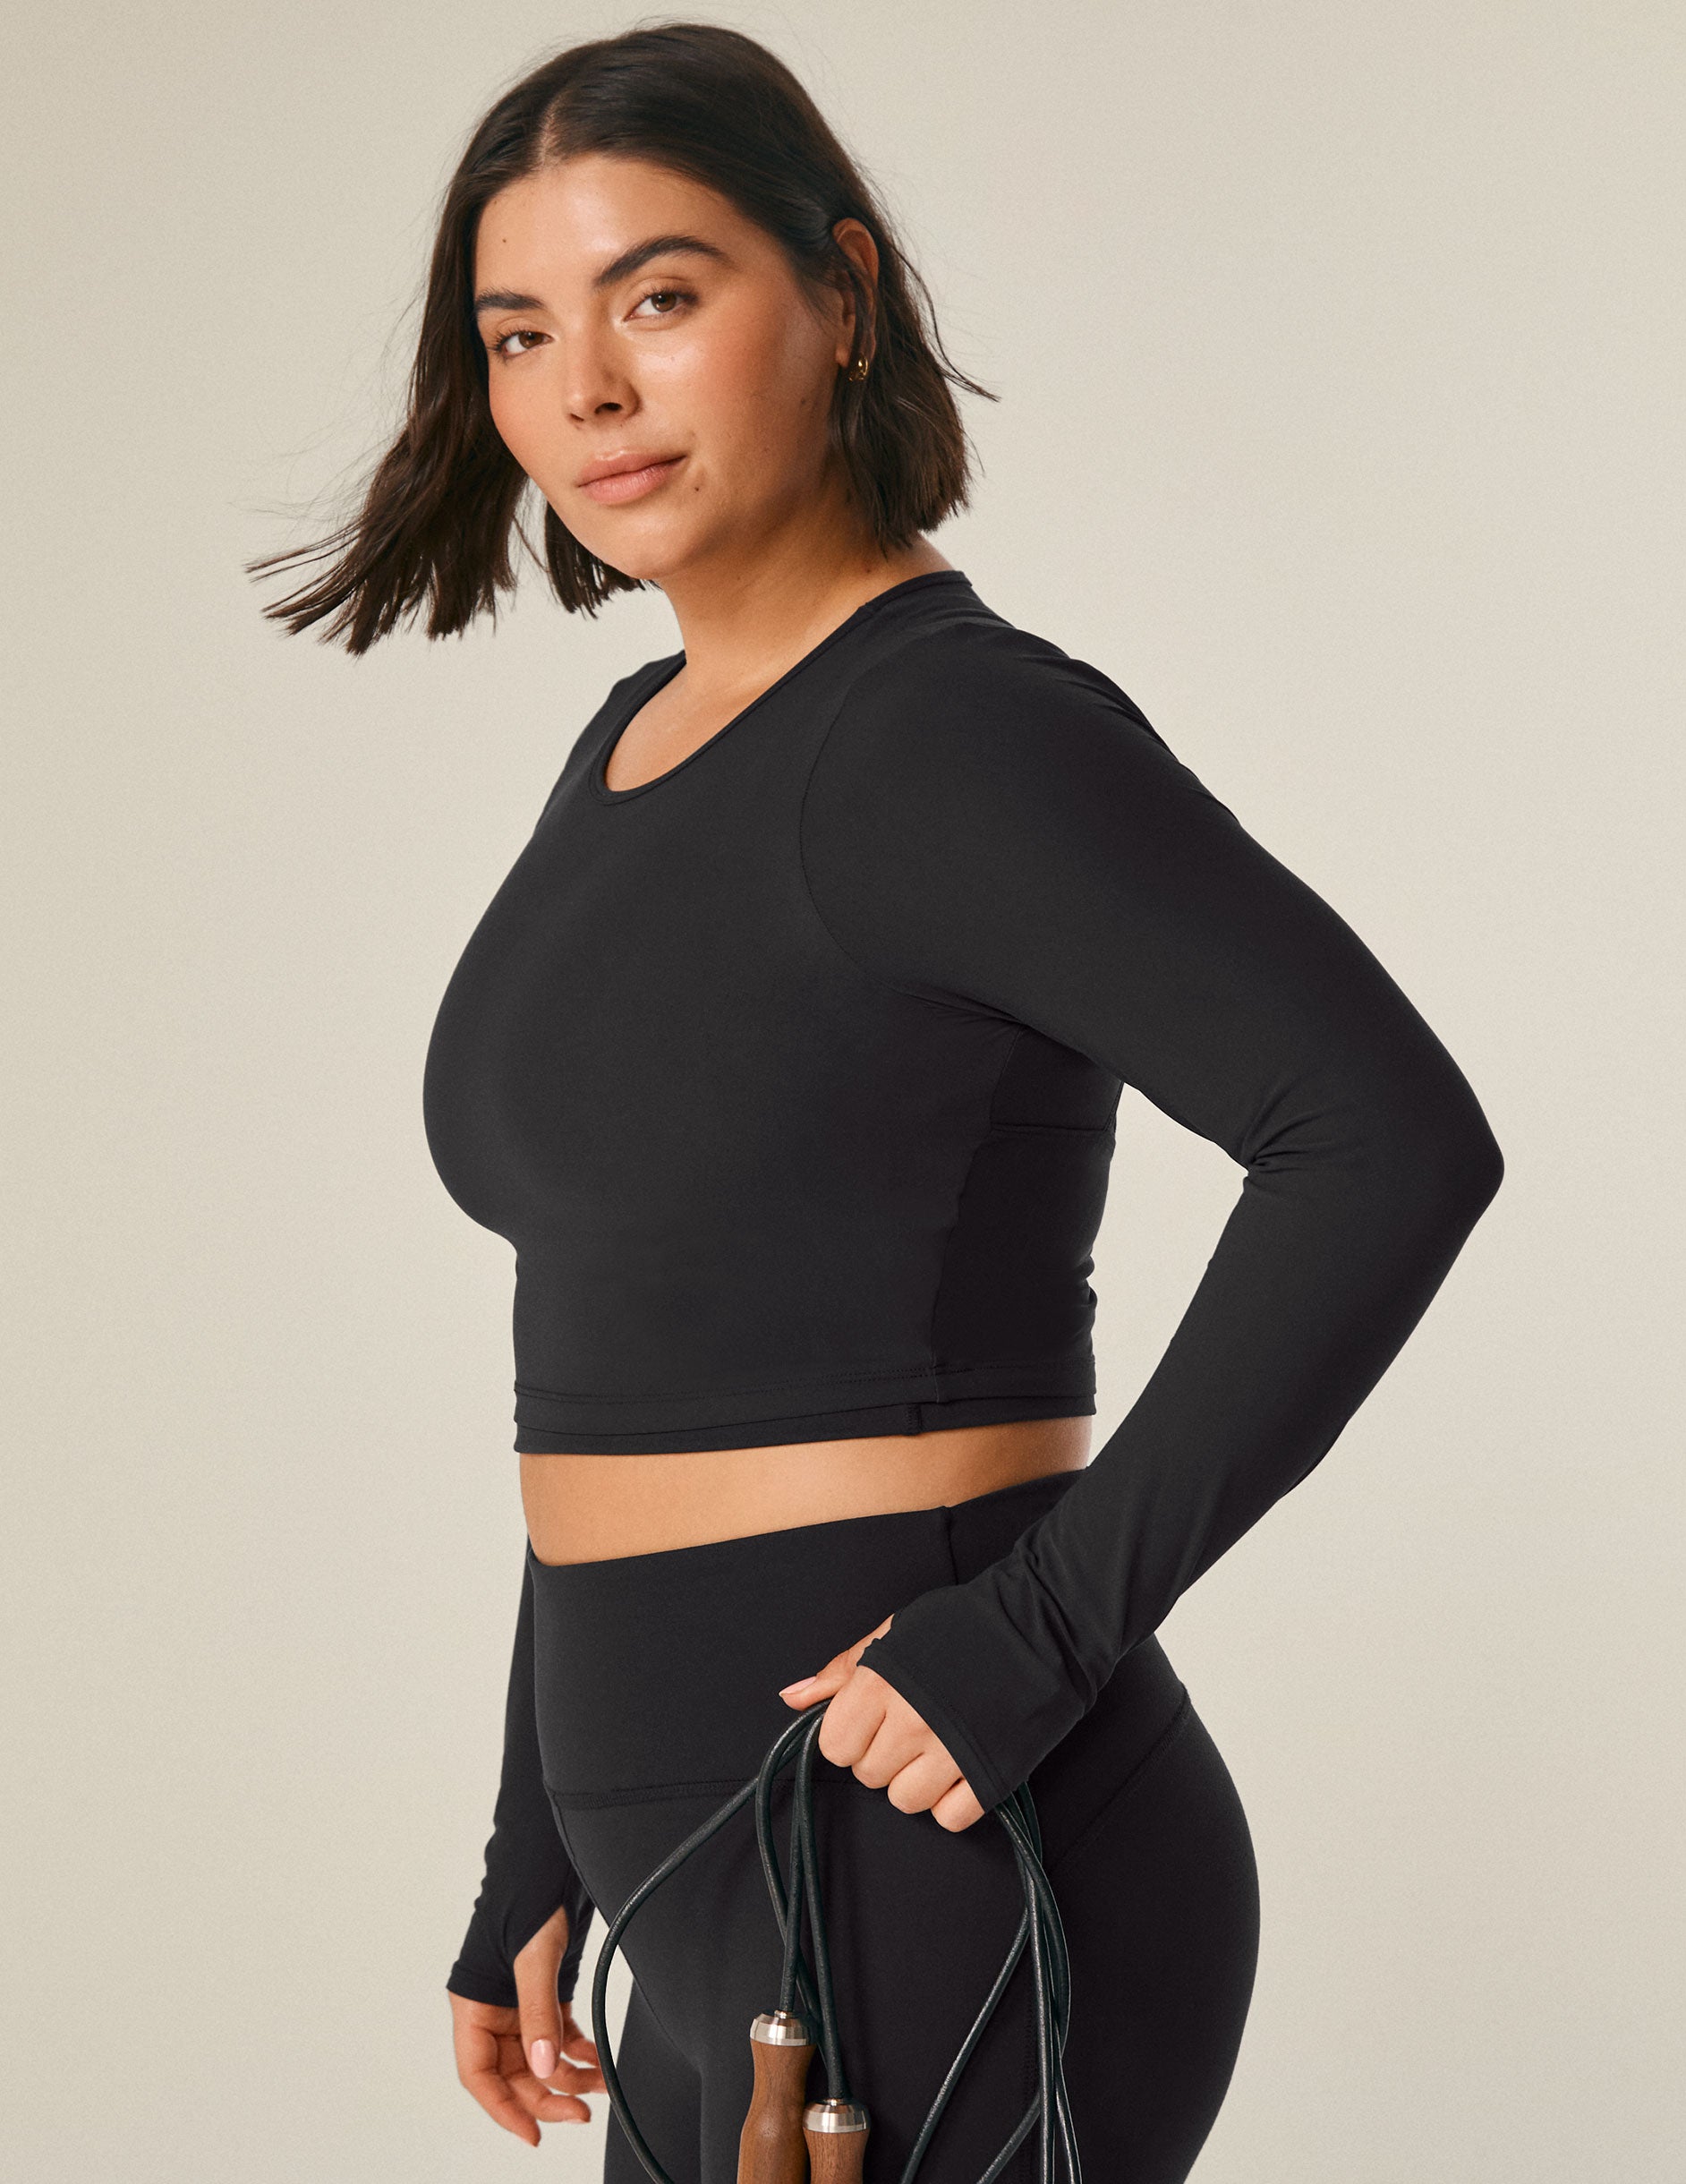 black long sleeve cropped top with an open back detail.